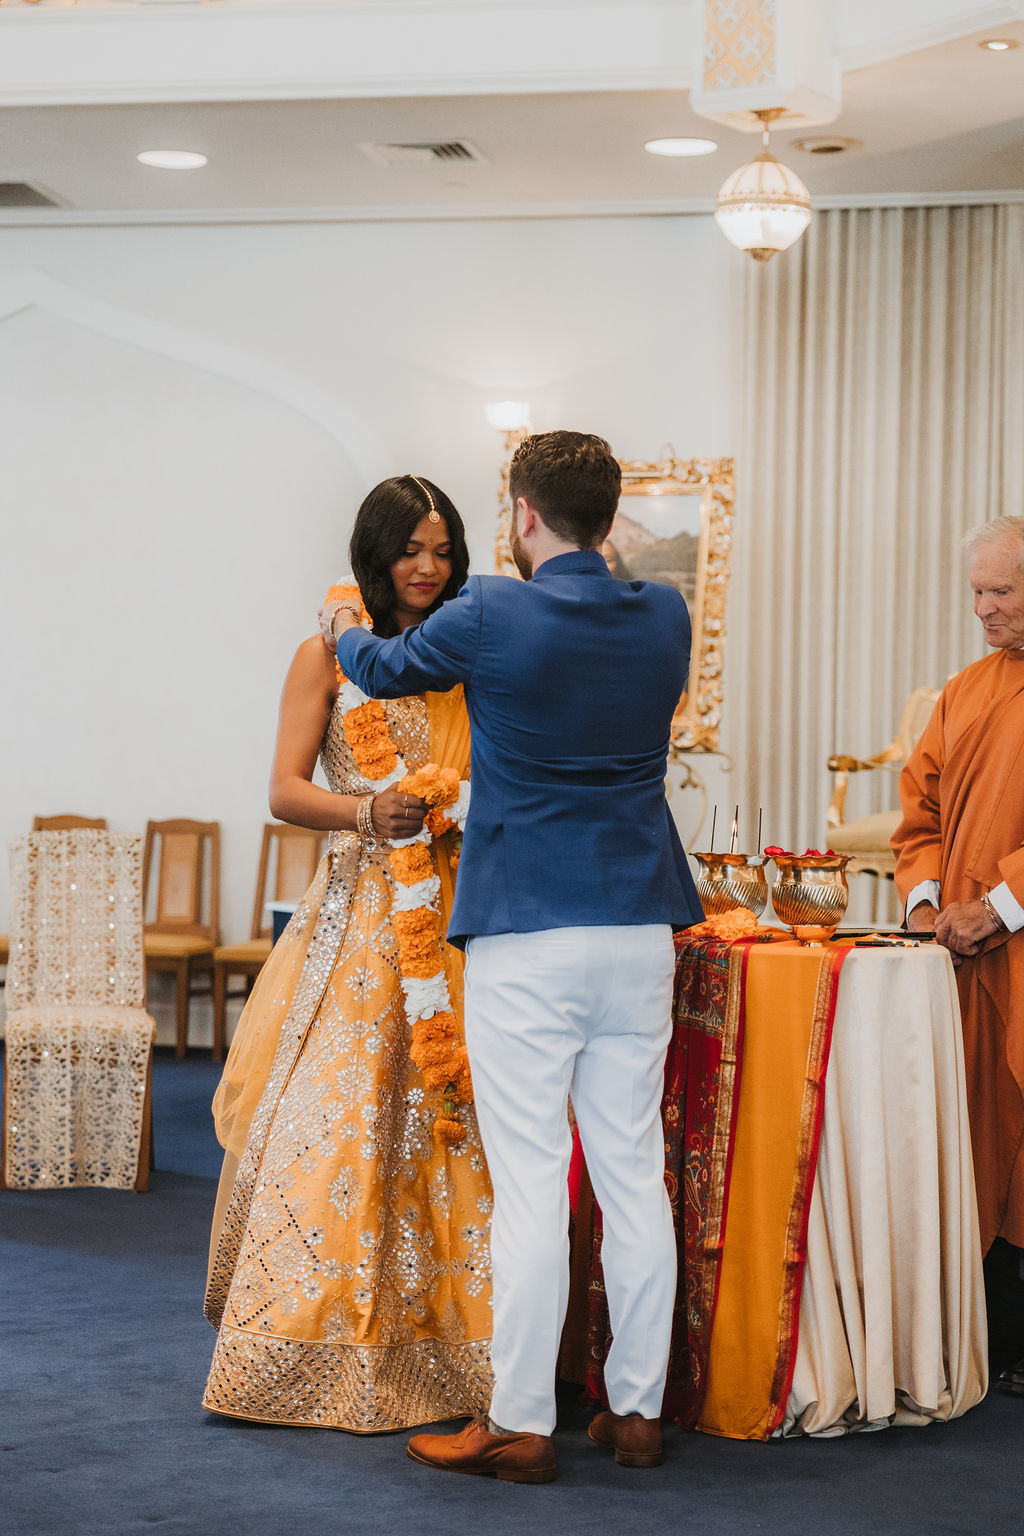 Hindu and Christian wedding ceremony at Lake Shrine Temple in Malibu with orange color palette